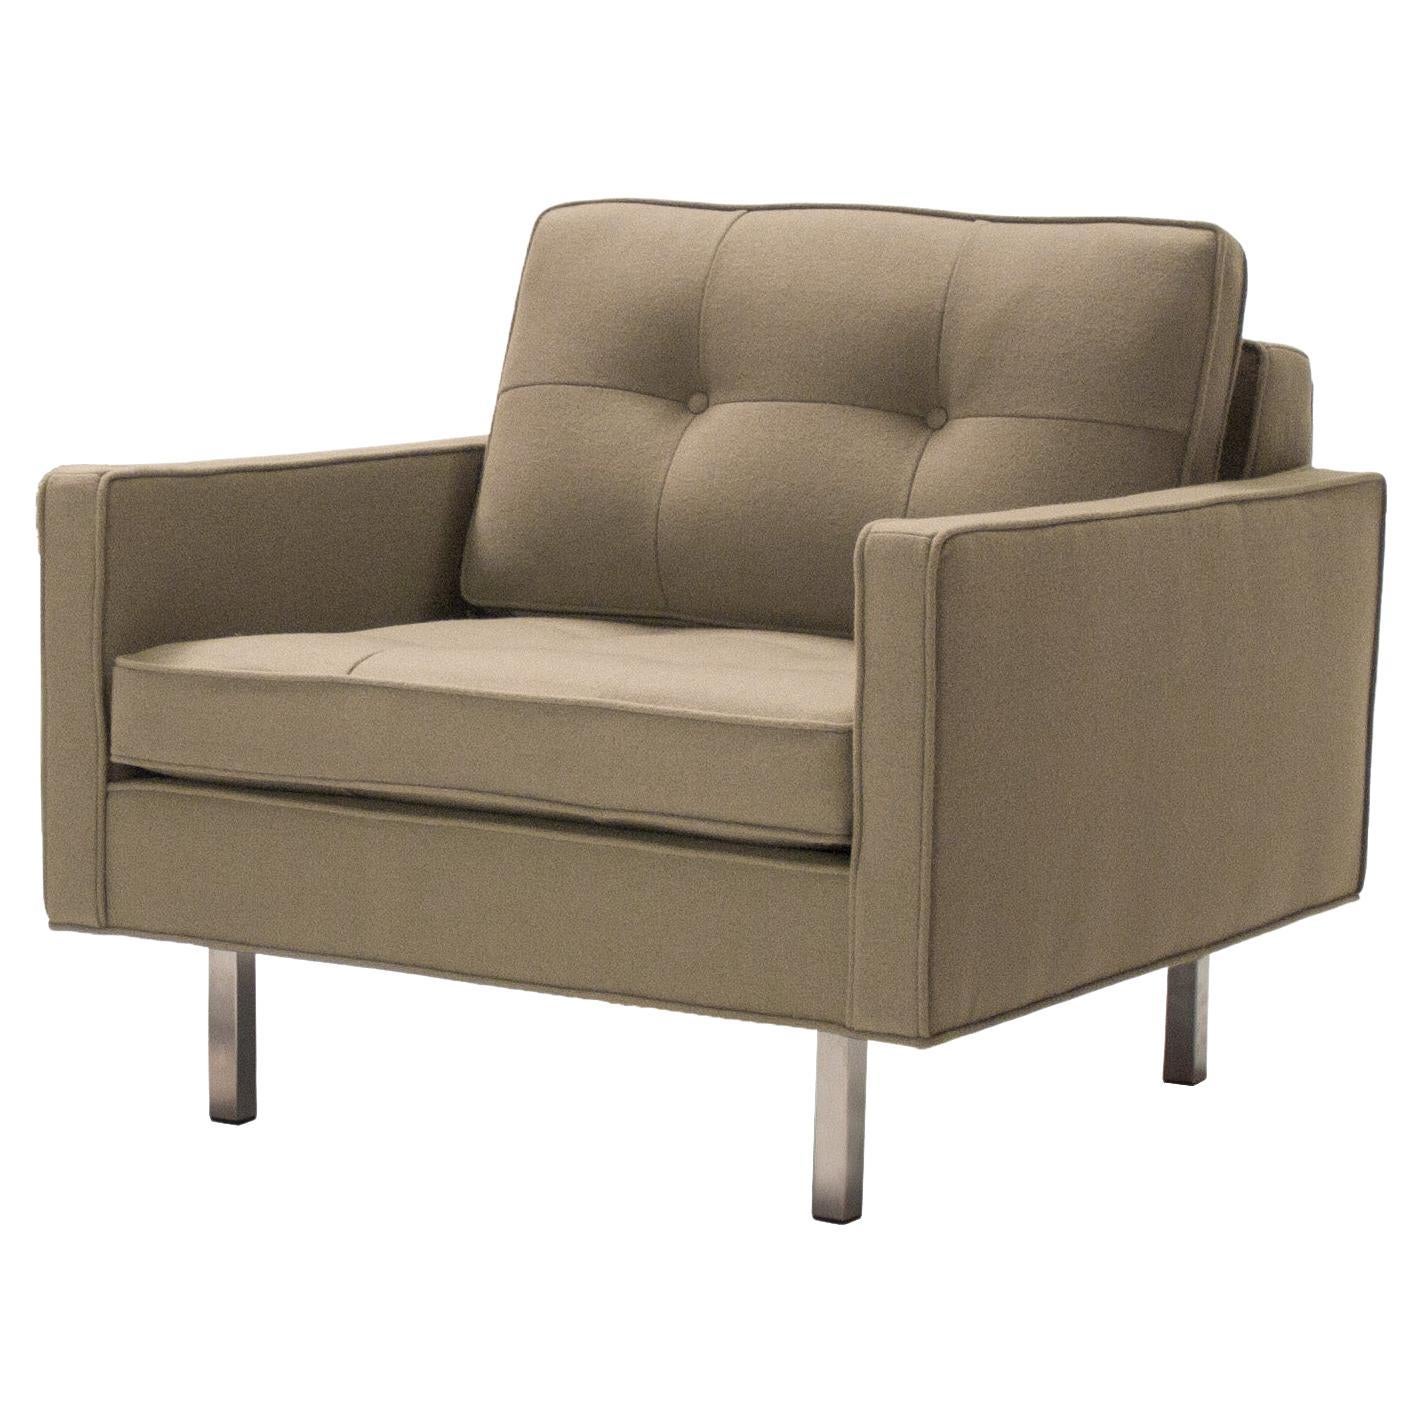 Vioski New Century Modern Chicago Lounge Chair in Tan For Sale